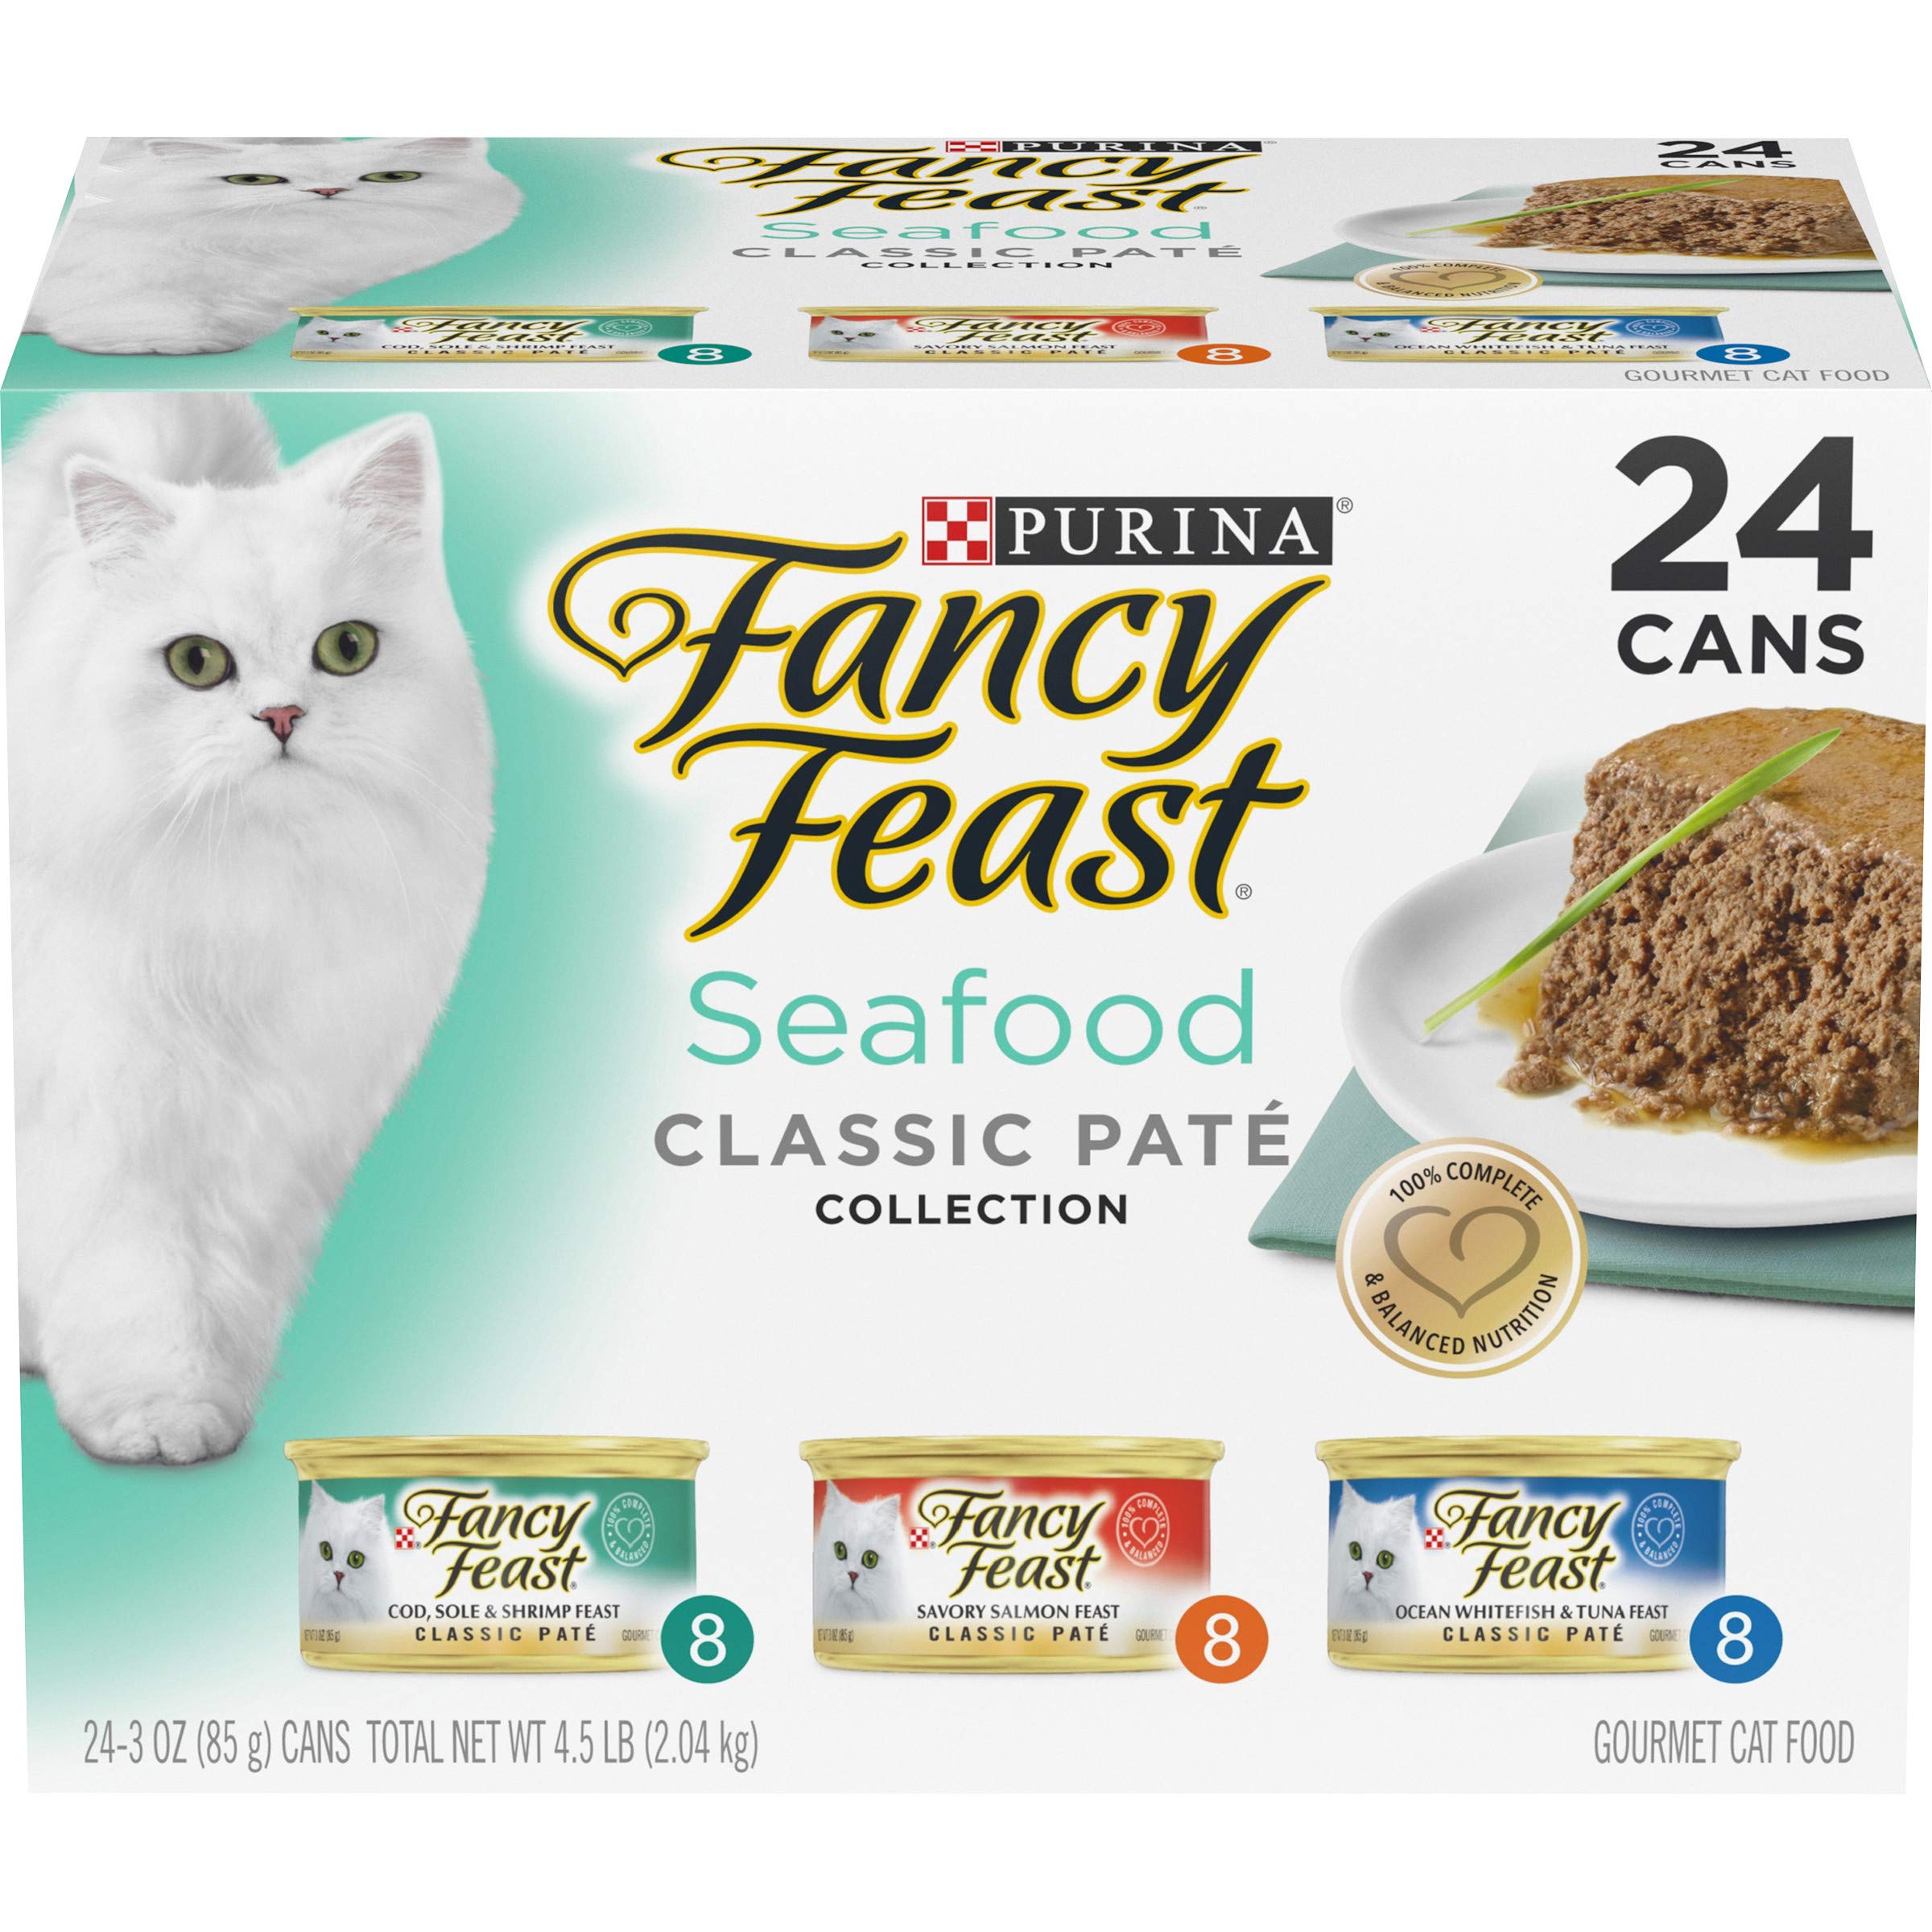 Purina Fancy Feast Grain Free Pate Wet Cat Food Variety Pack, Seafood Classic Pate Collection - (24) 3 oz. Cans $13.43